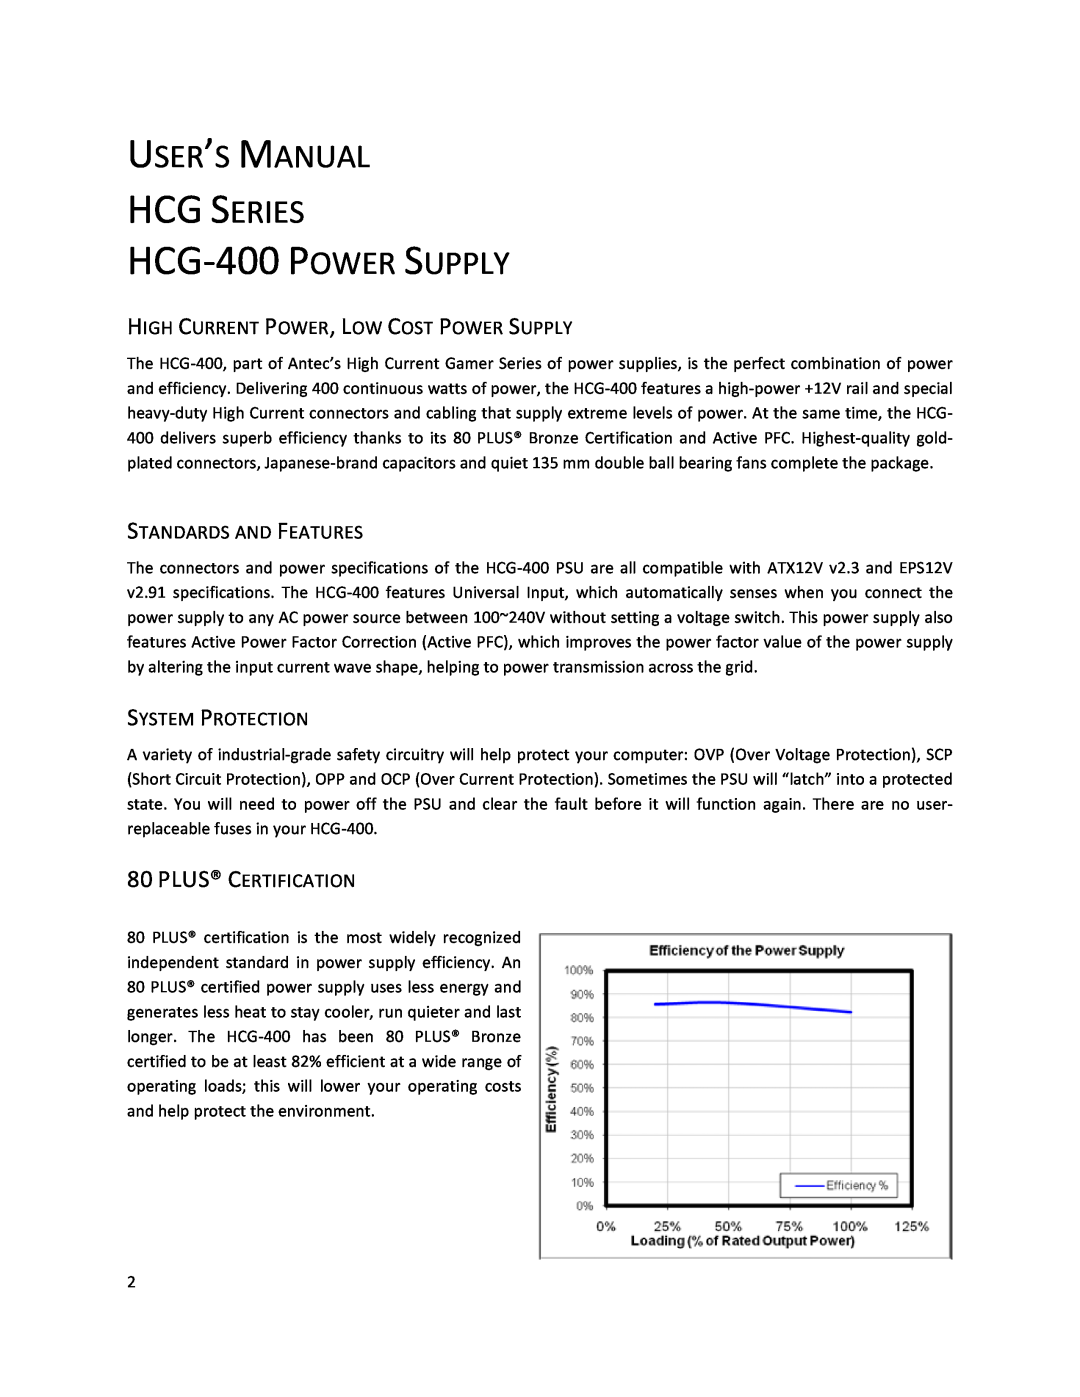 Antec HCG SERIES HCG-400 POWER SUPPLY, High Current Power, Low Cost Power Supply, Standards And Features, User’S Manual 